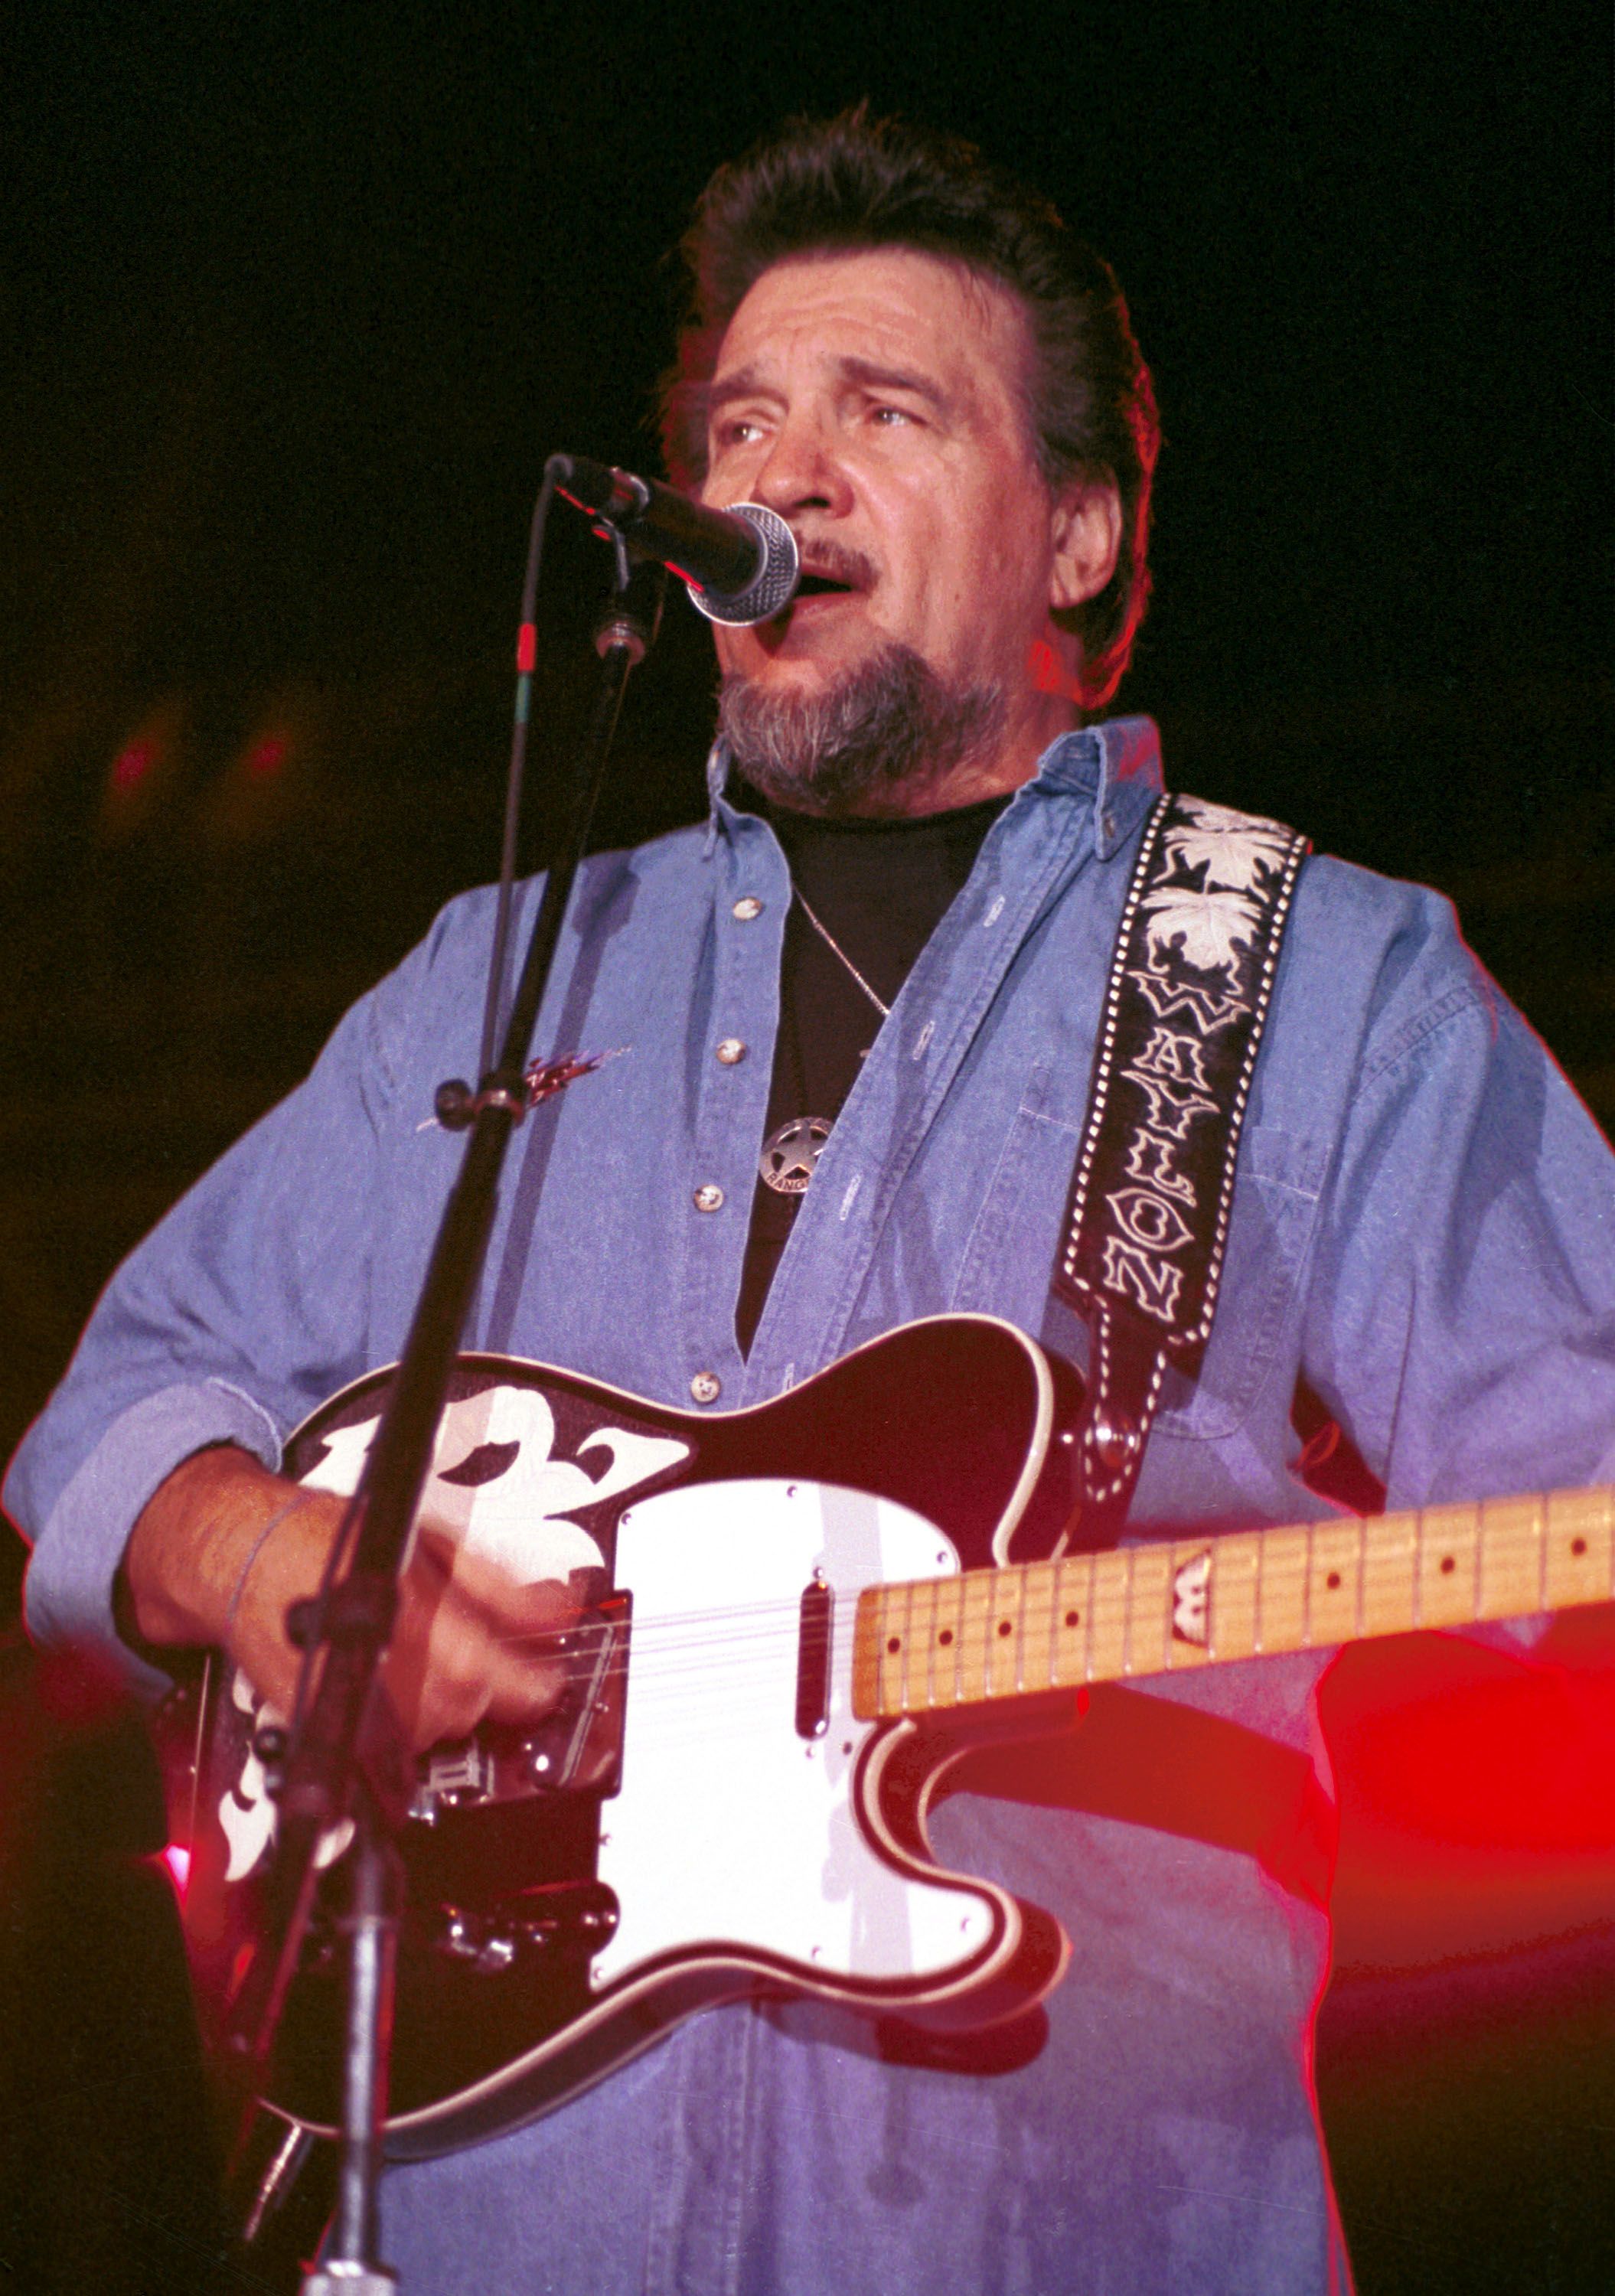 Waylon Jennings performs at The Rio on June 3, 1995, in Las Vegas, Nevada |  Photo: Scott Harrison/Getty Images